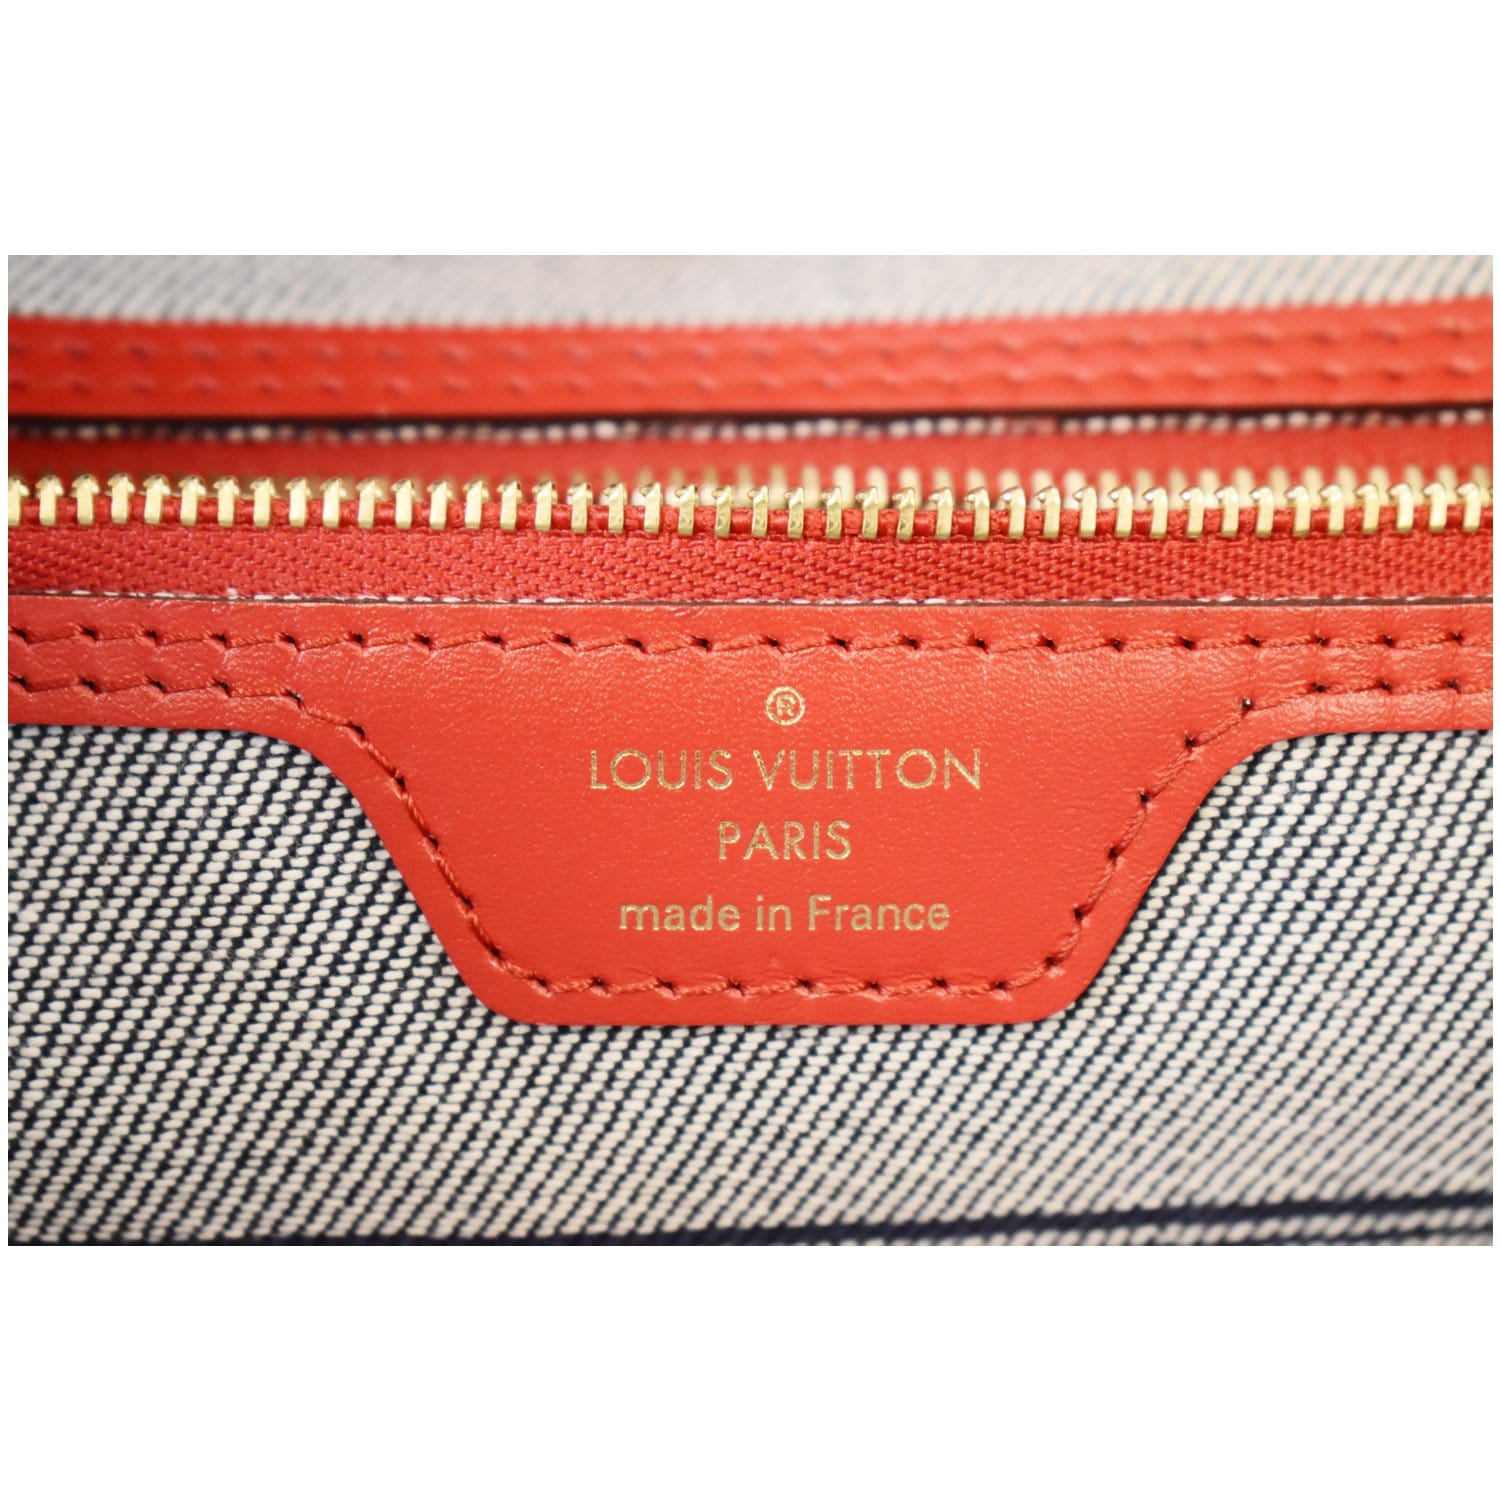 louis vuitton serial number checker by andy haffle - Issuu